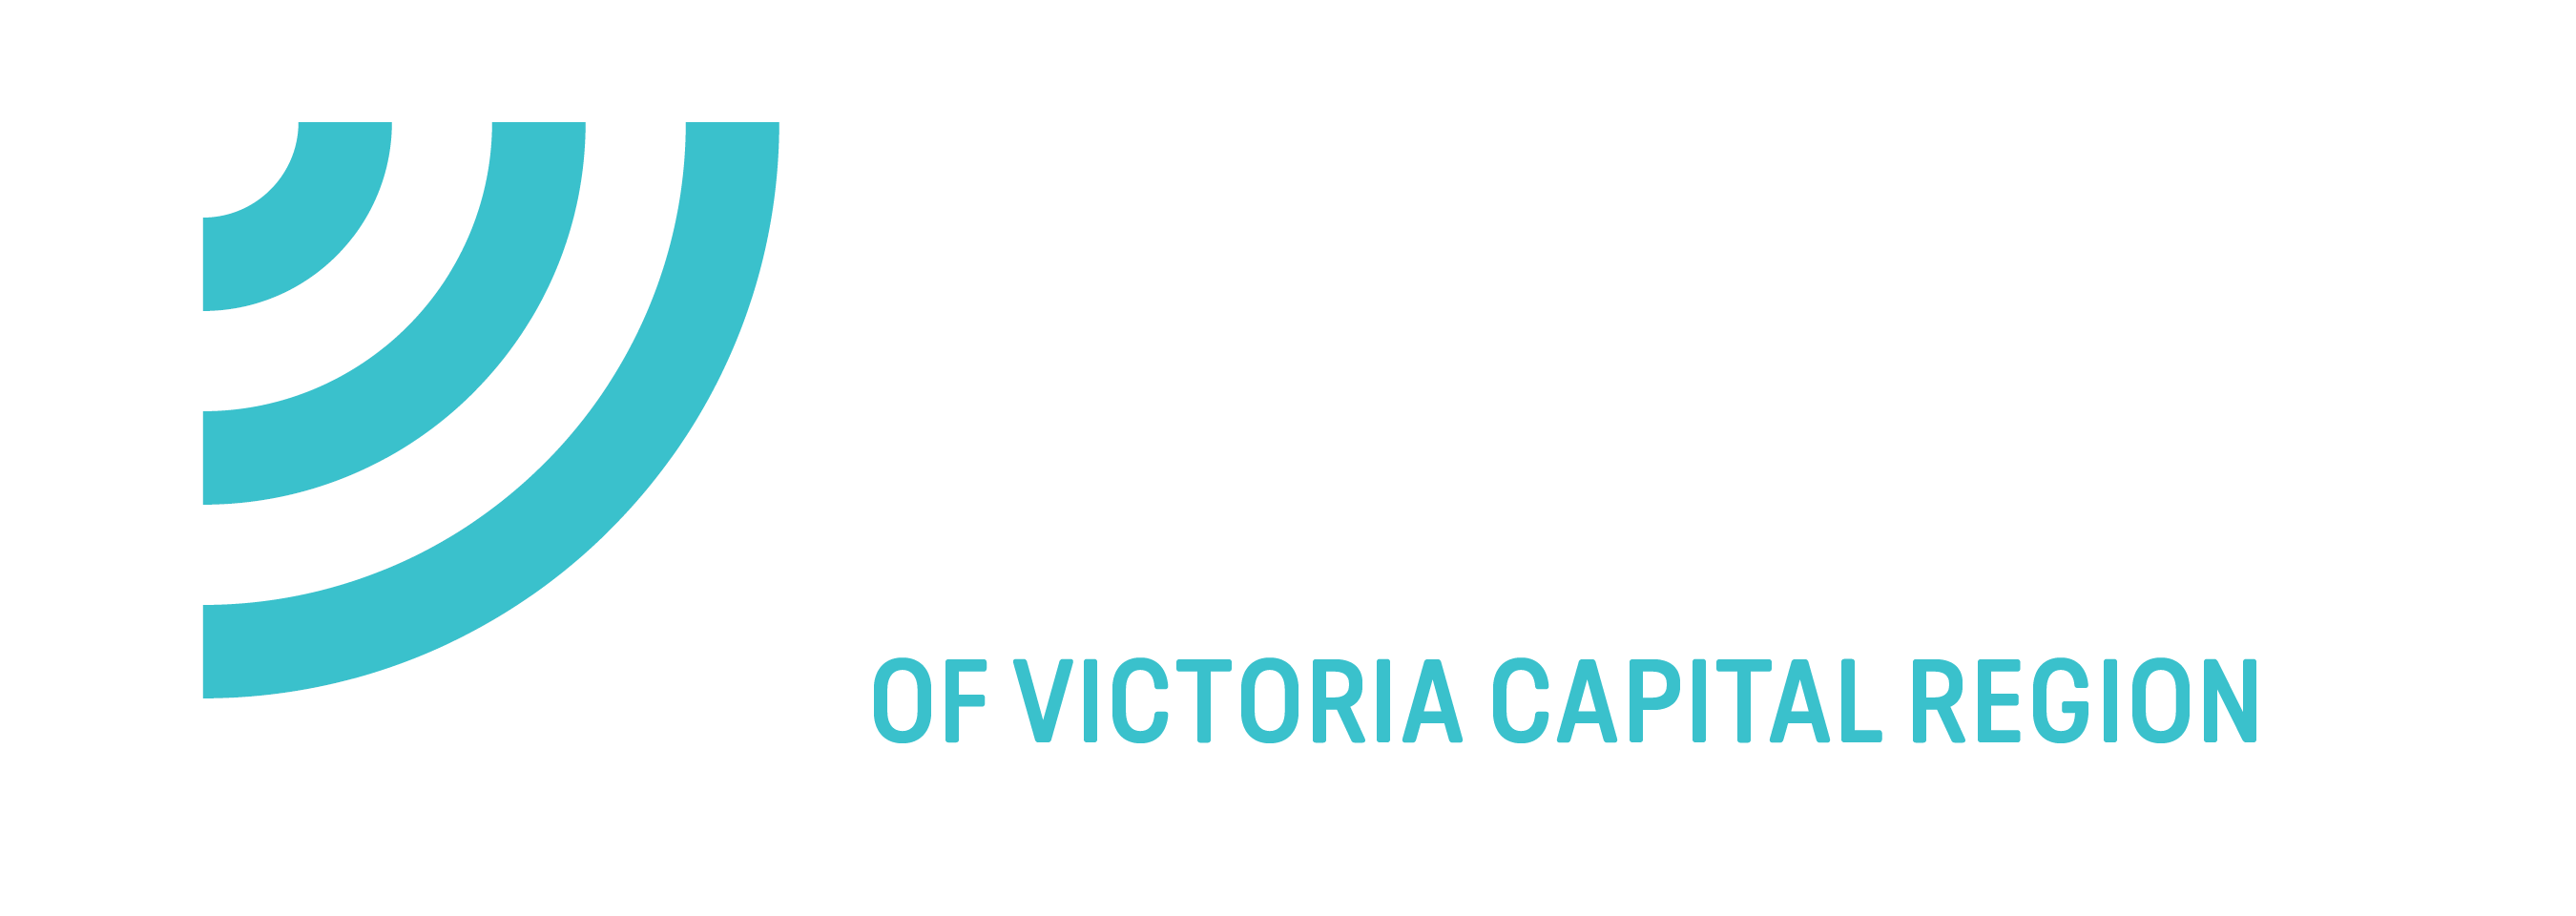 Location & Hours - Big Brothers Big Sisters of Victoria Capital Region